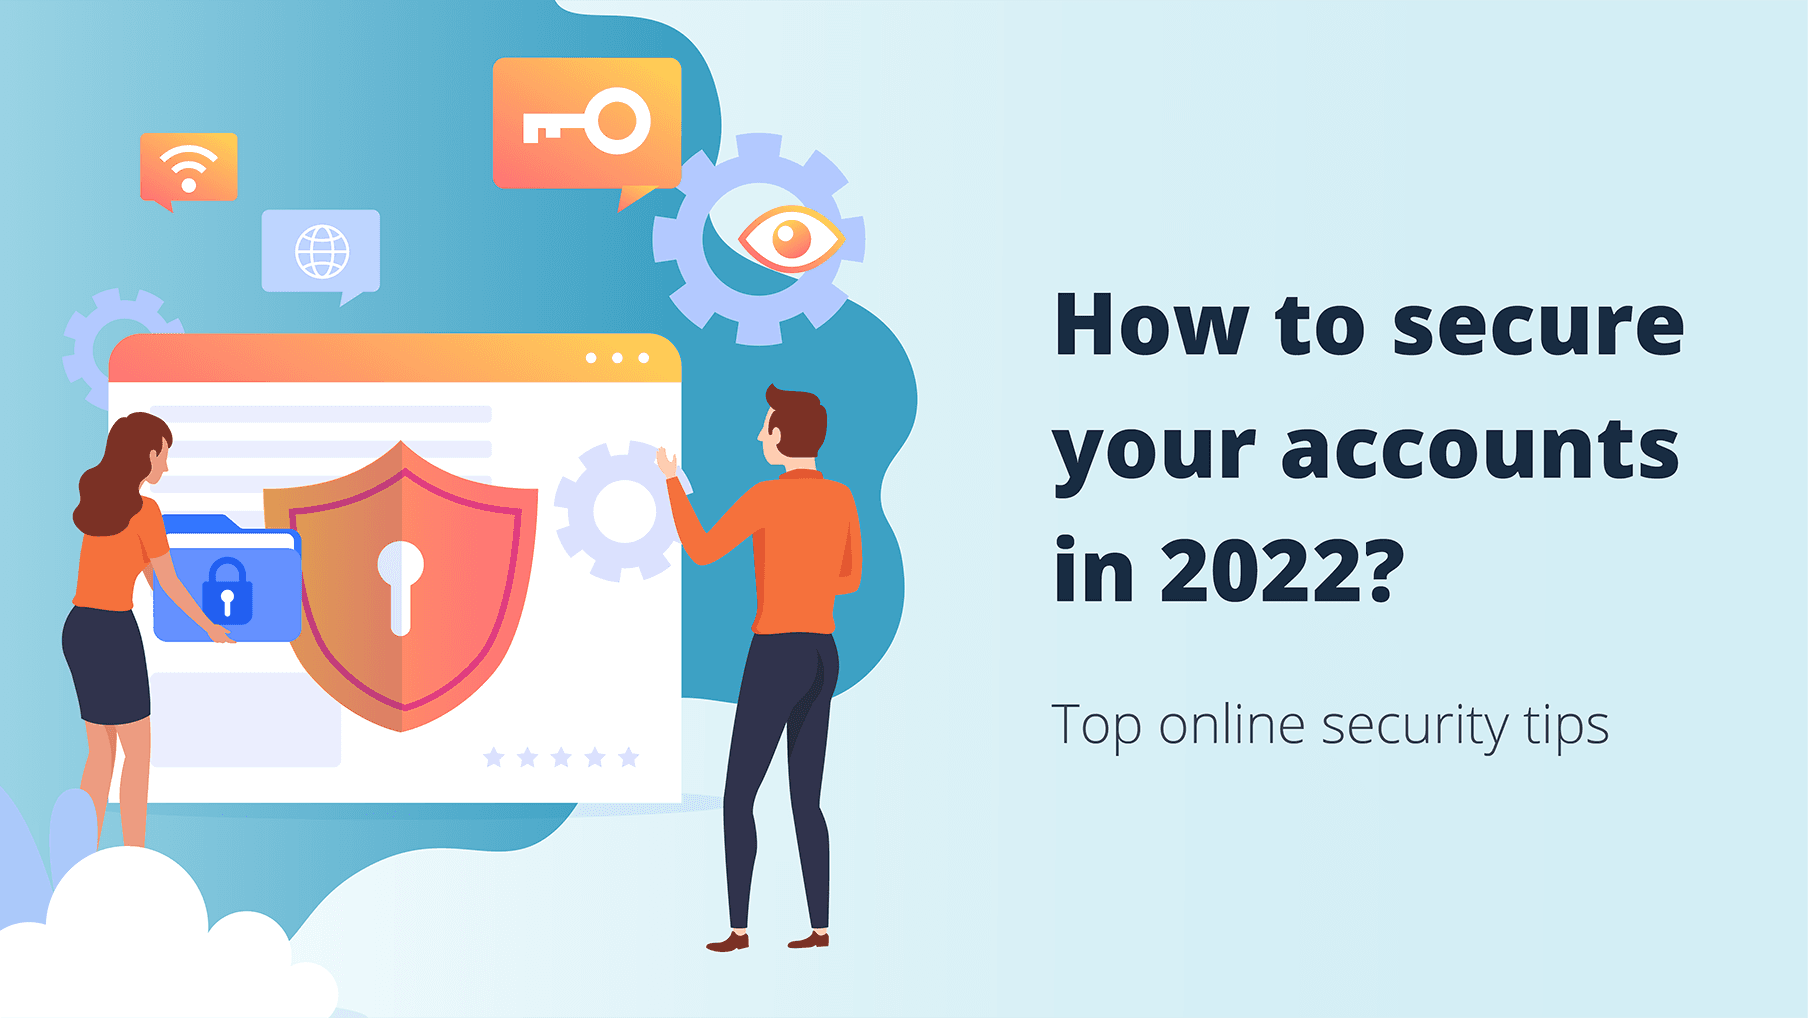 Online security 2022, Authentication tips